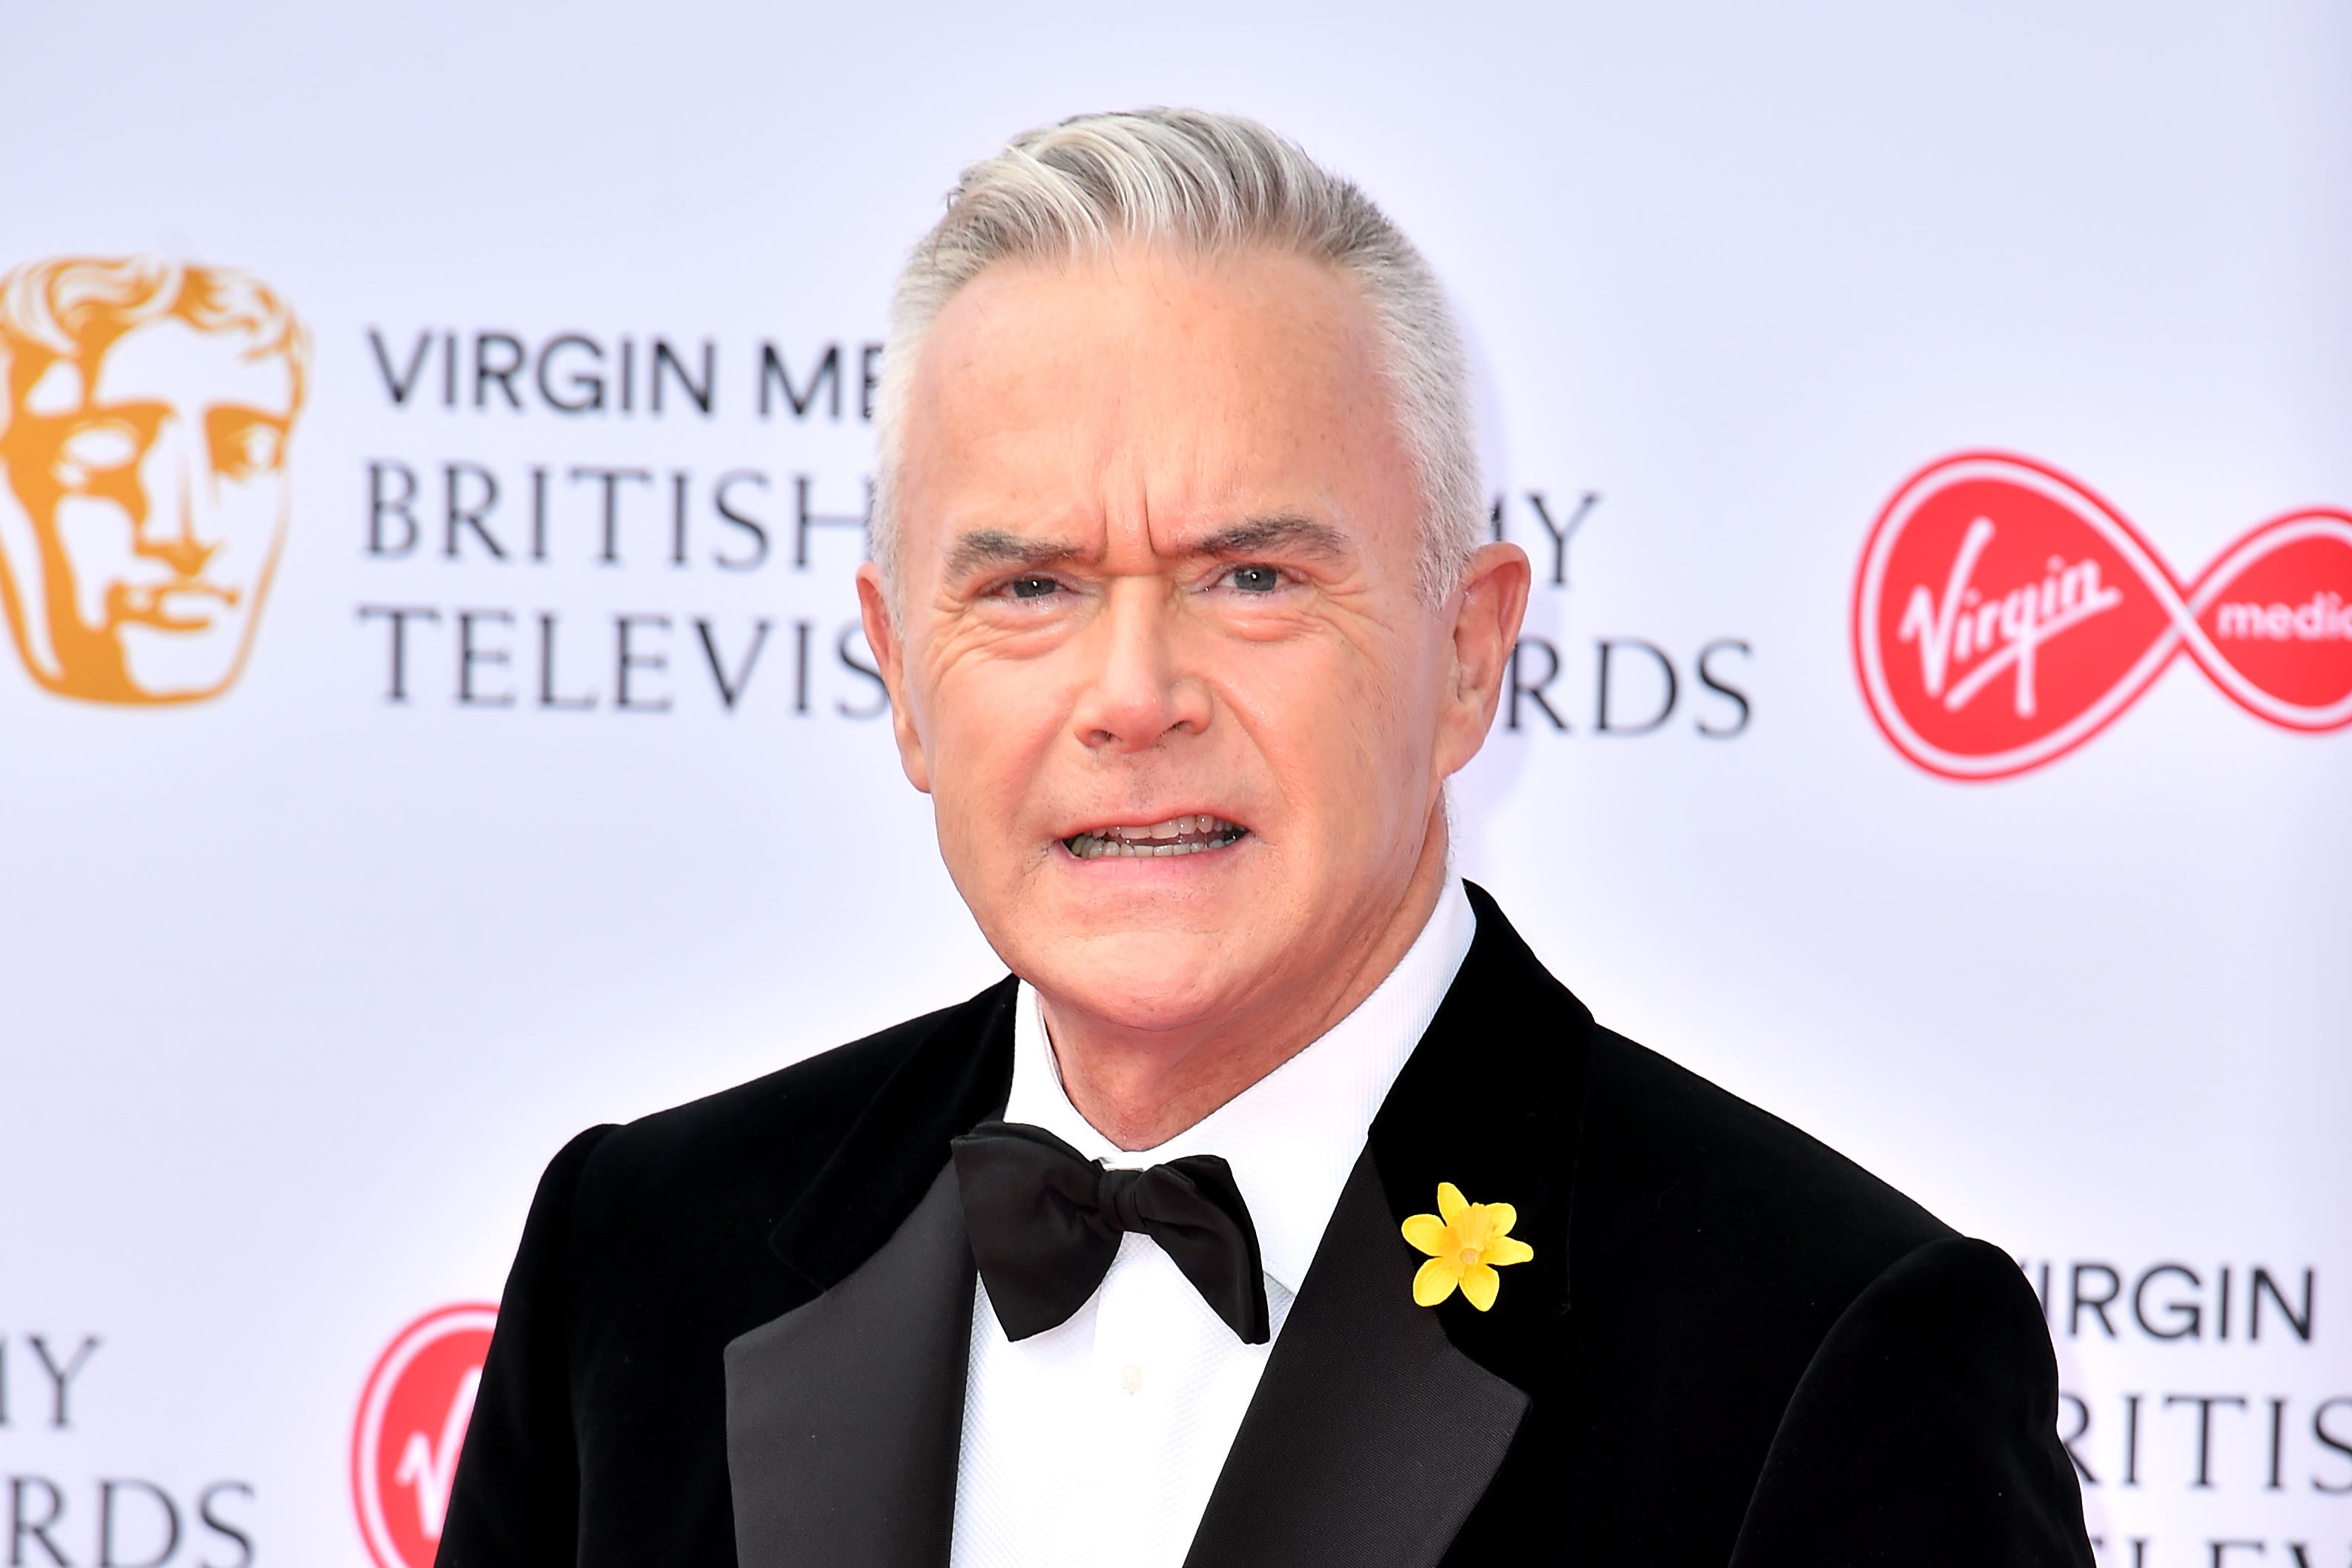 Huw Edwards resigned from the BBC last week on medical grounds nine months after allegations were made that he had paid a young person £35,000 and received explicity images from them